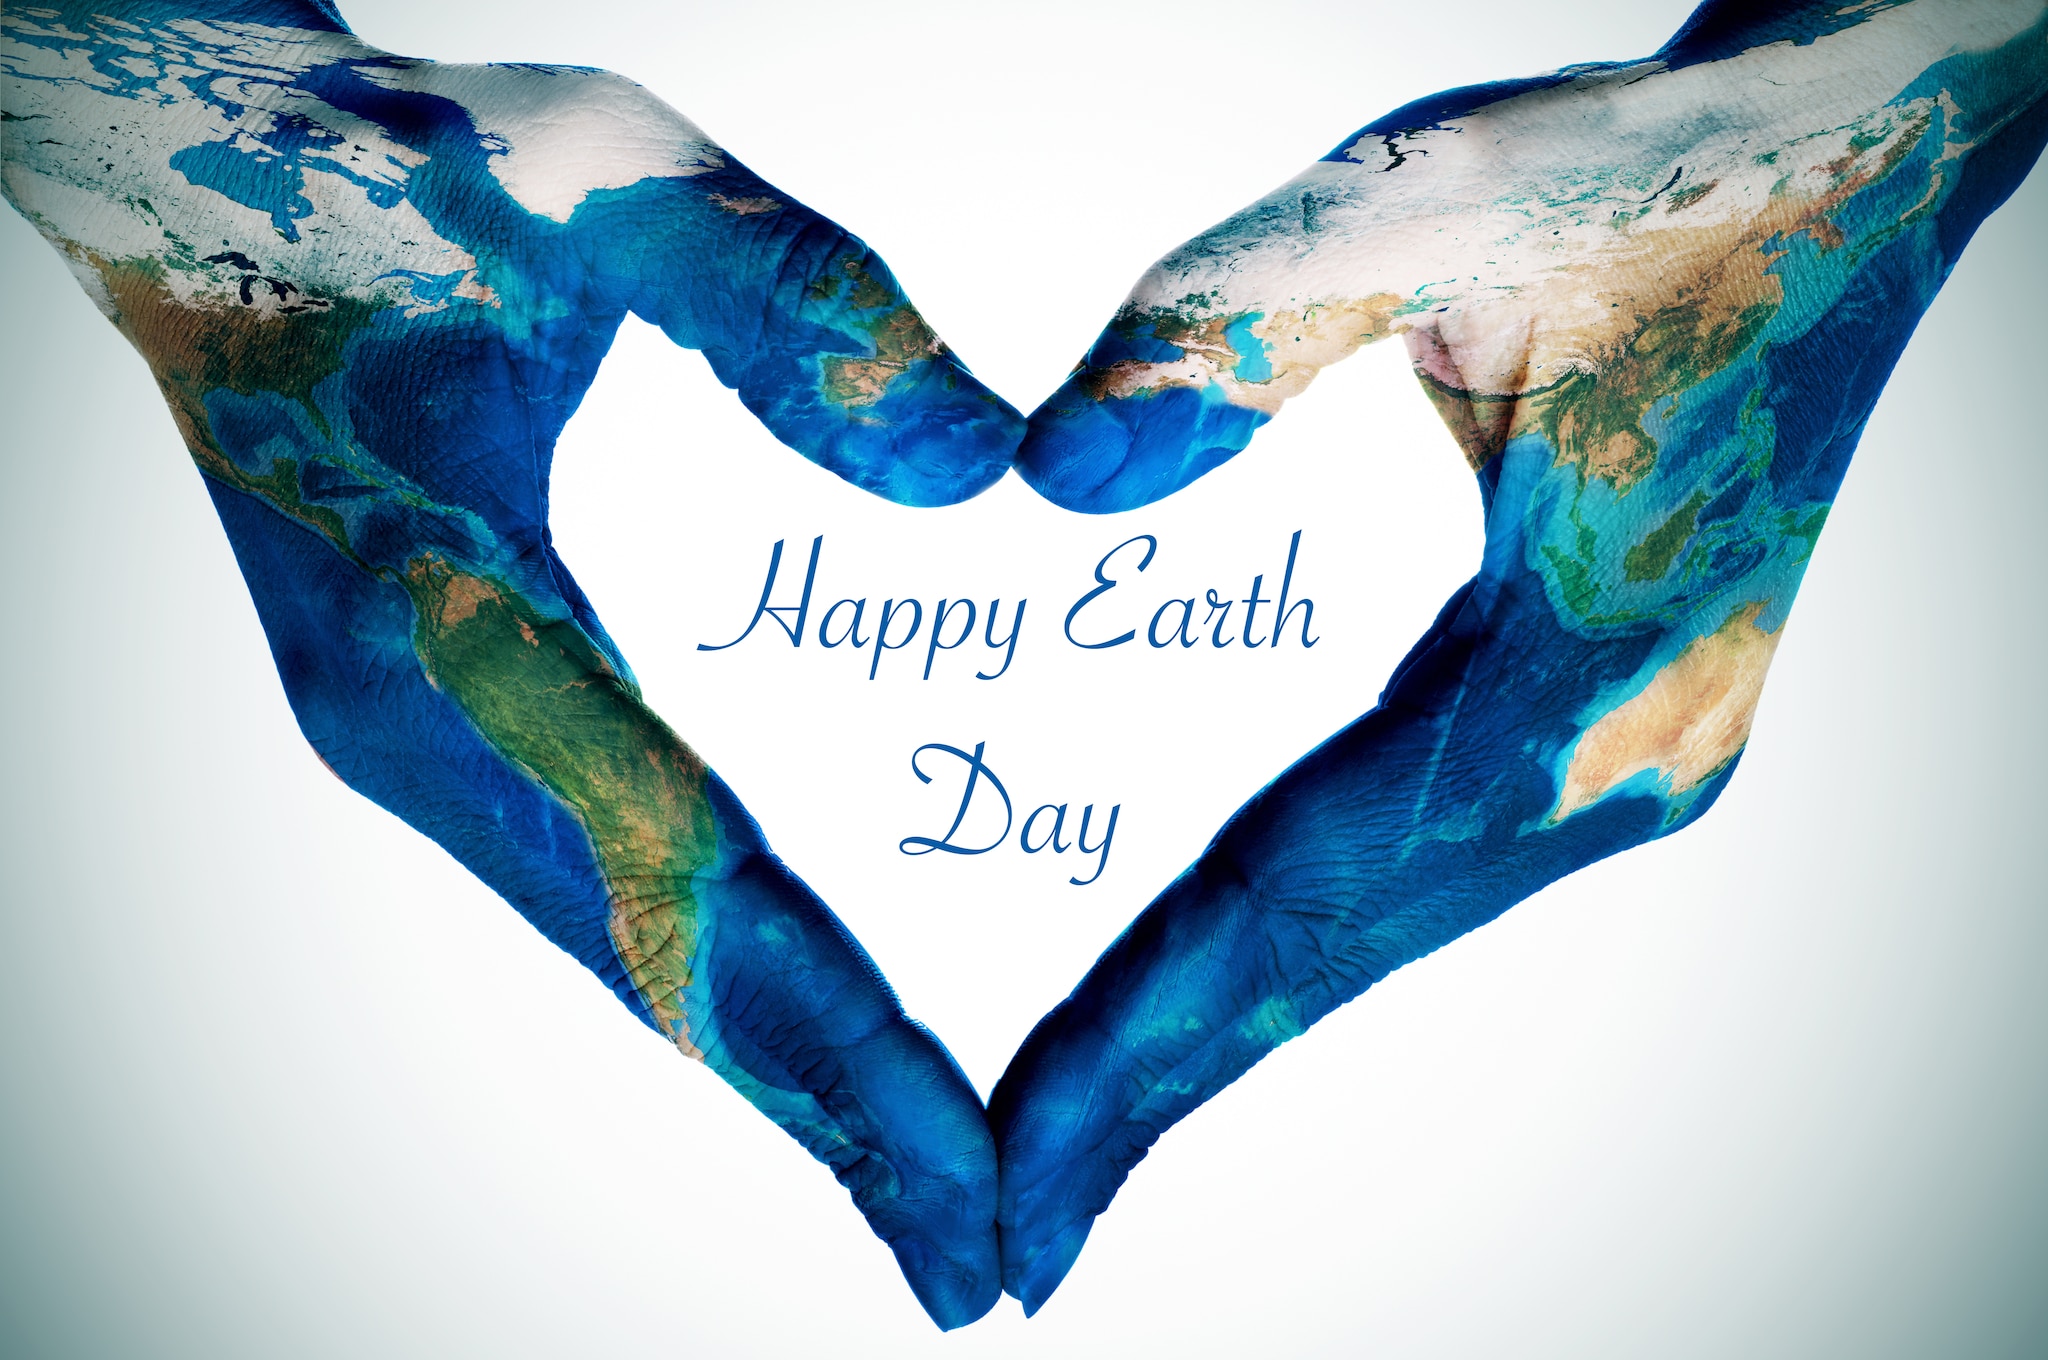 Happy Earth Day 2022 Wishes, Images, Status, Quotes, Messages and